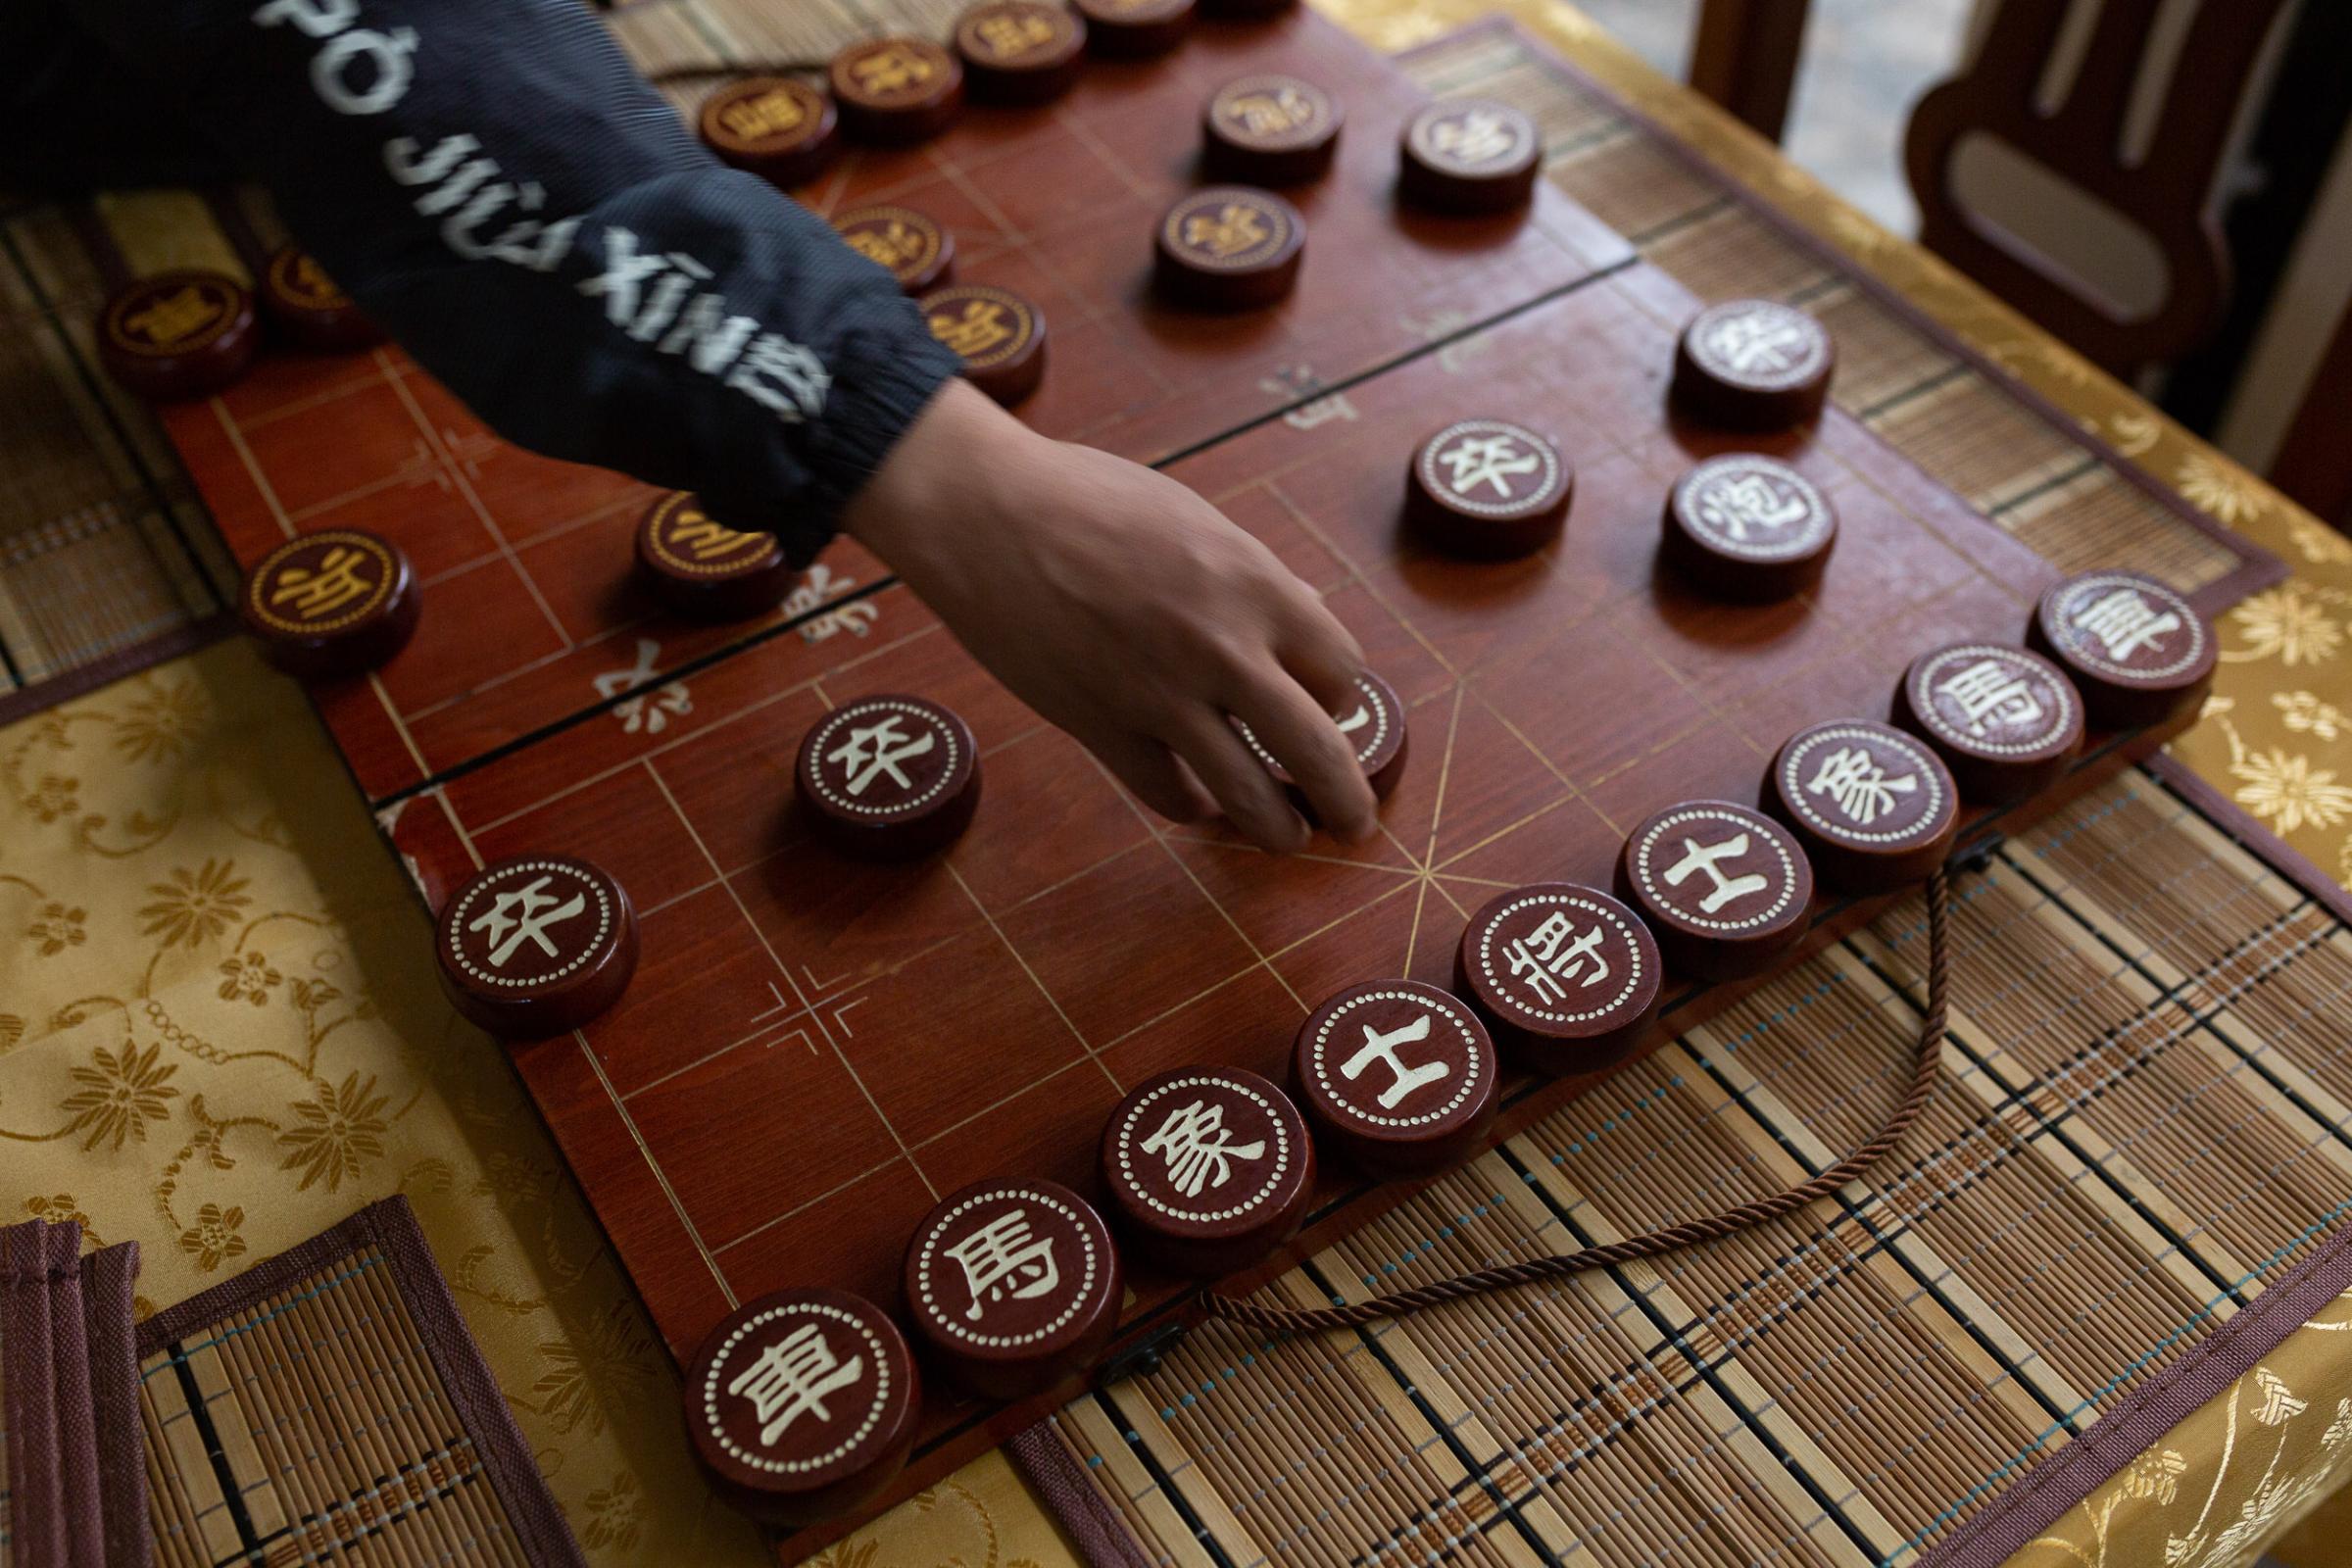 Return to China? Xing would rather die in the jungle - A Chinese board game in the dining room of the hotel...